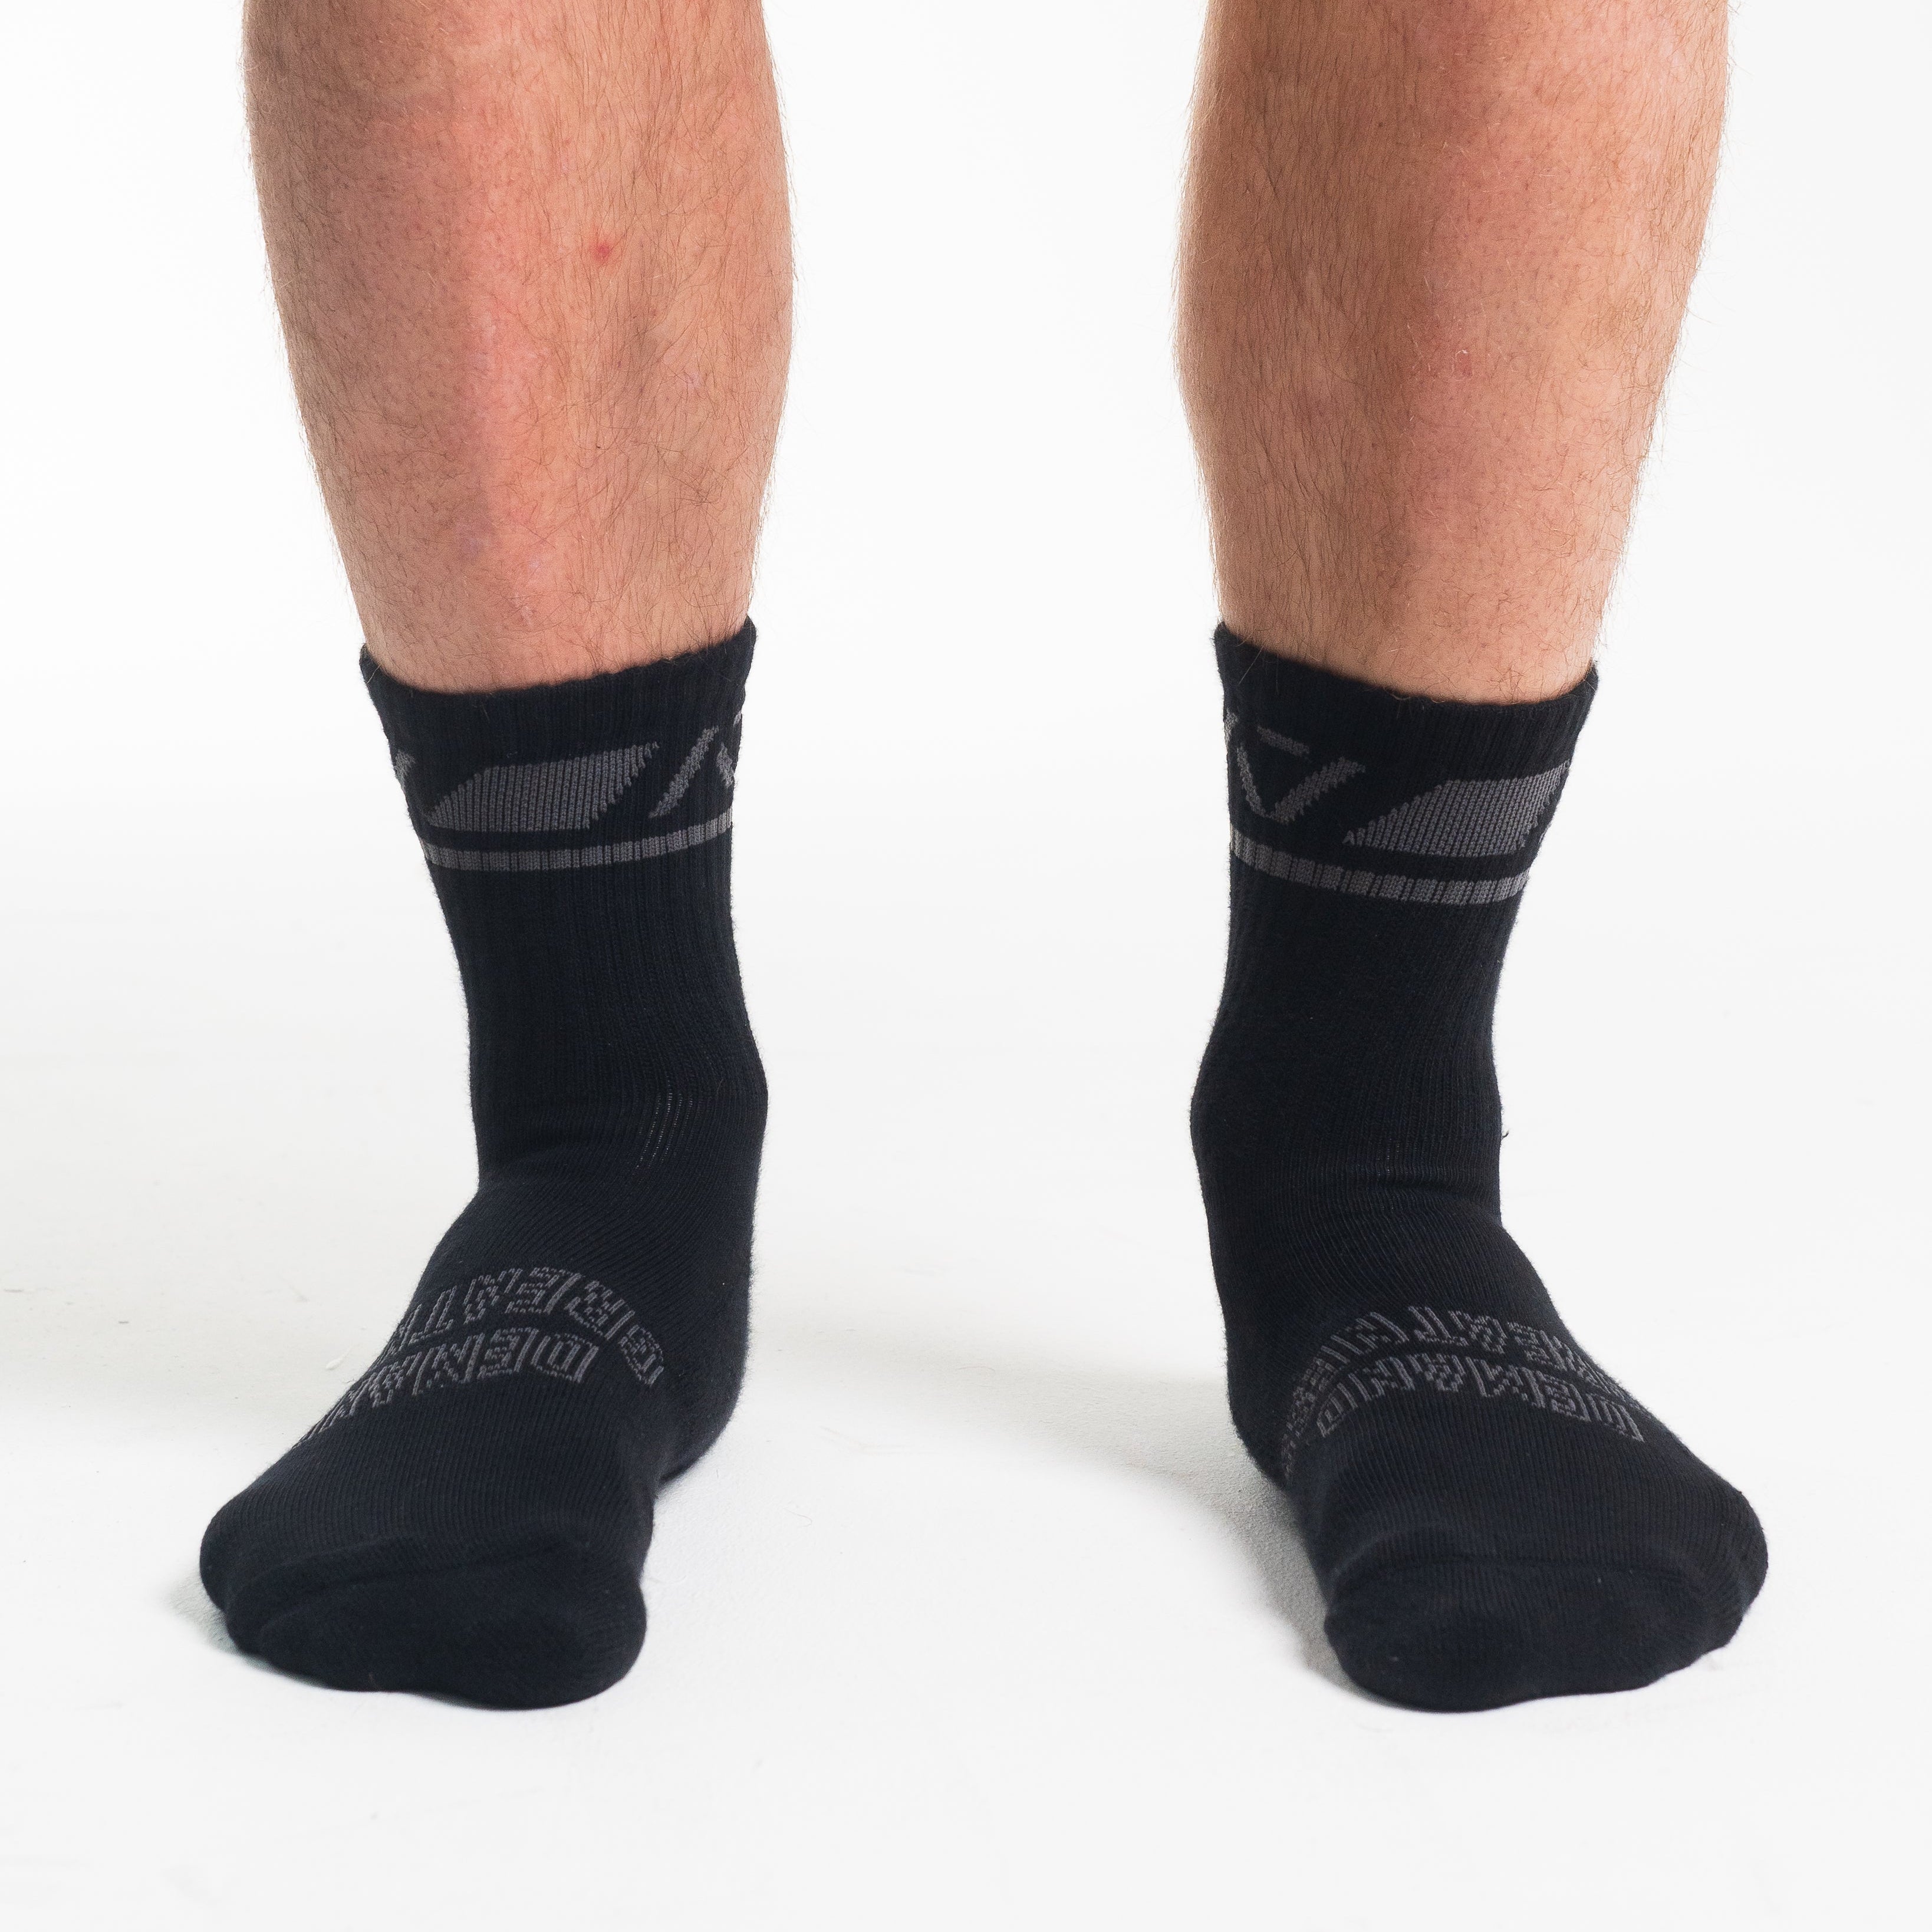 A7 Shadow Stone Crew socks showcase dark grey logos to keep contrast at a minimum and let your energy show on the platform, in your training or while out and about. The IPF Approved Shadow Stone Meet Kit includes Powerlifting Singlet, A7 Meet Shirt, A7 Zebra Wrist Wraps, A7 Deadlift Socks, Hourglass Knee Sleeves (Stiff Knee Sleeves and Rigor Mortis Knee Sleeves). All A7 Powerlifting Equipment shipping to UK, Norway, Switzerland and Iceland.